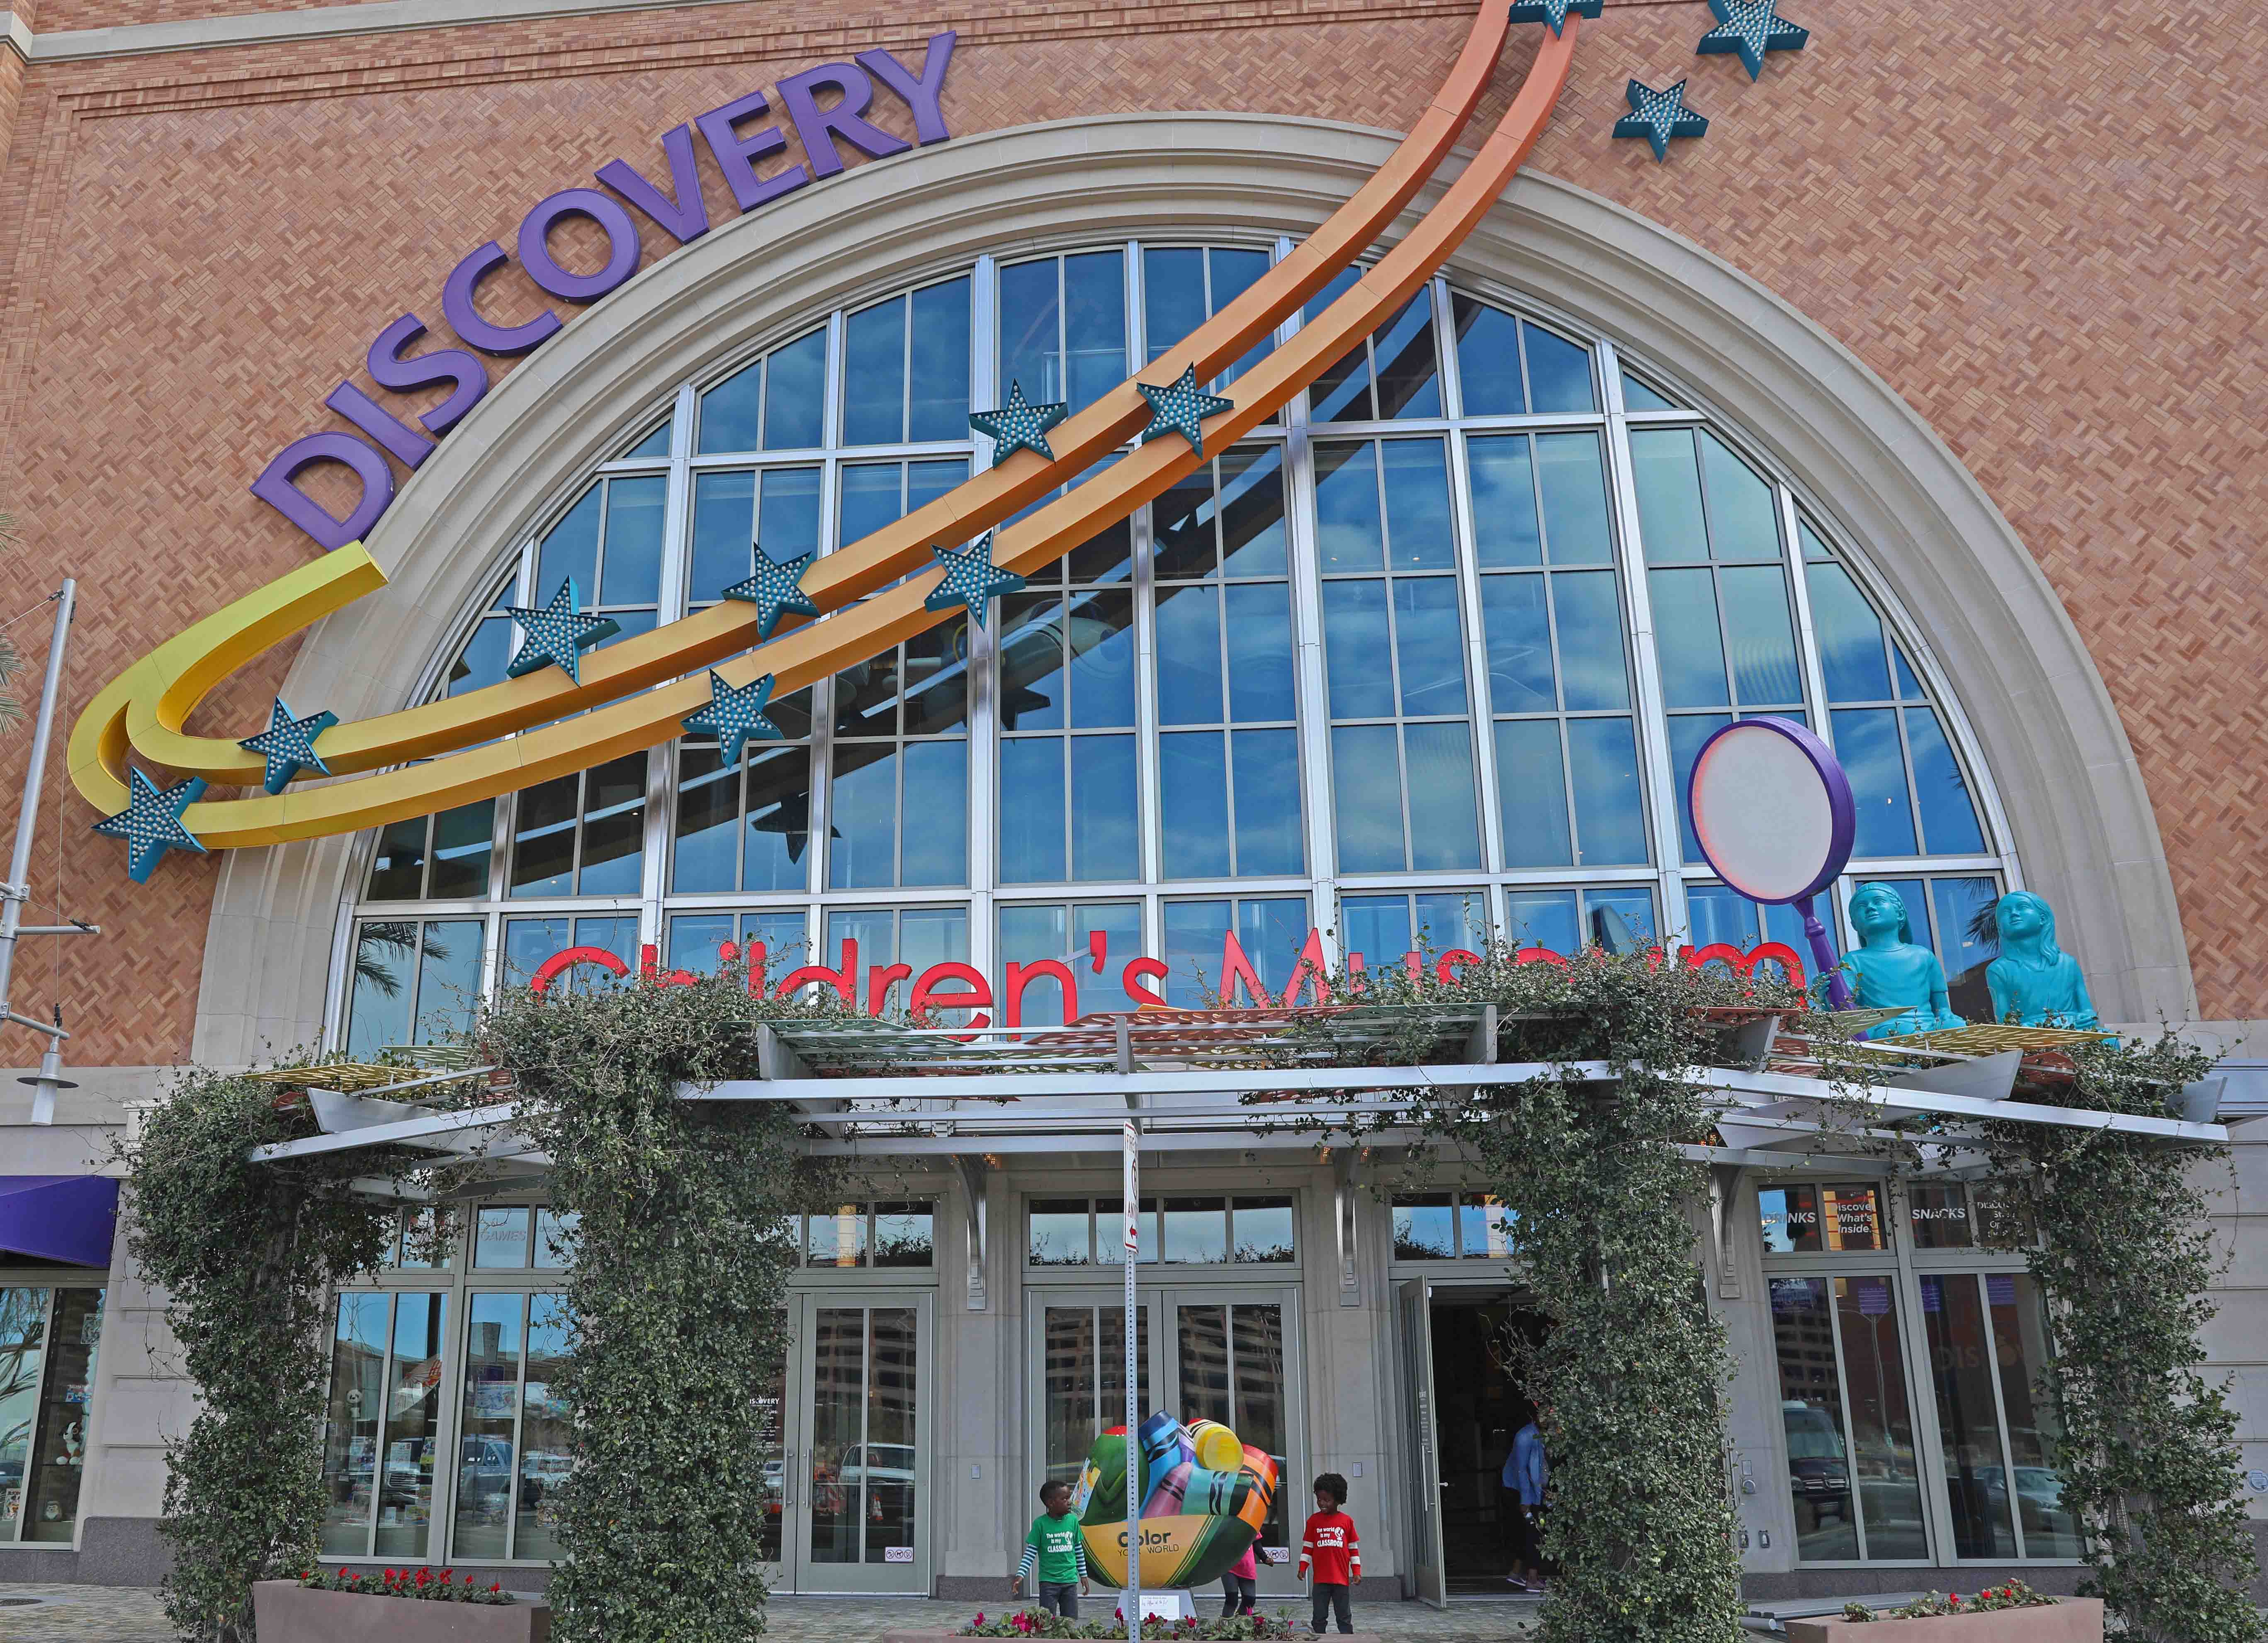 Discovery Children’s Museum